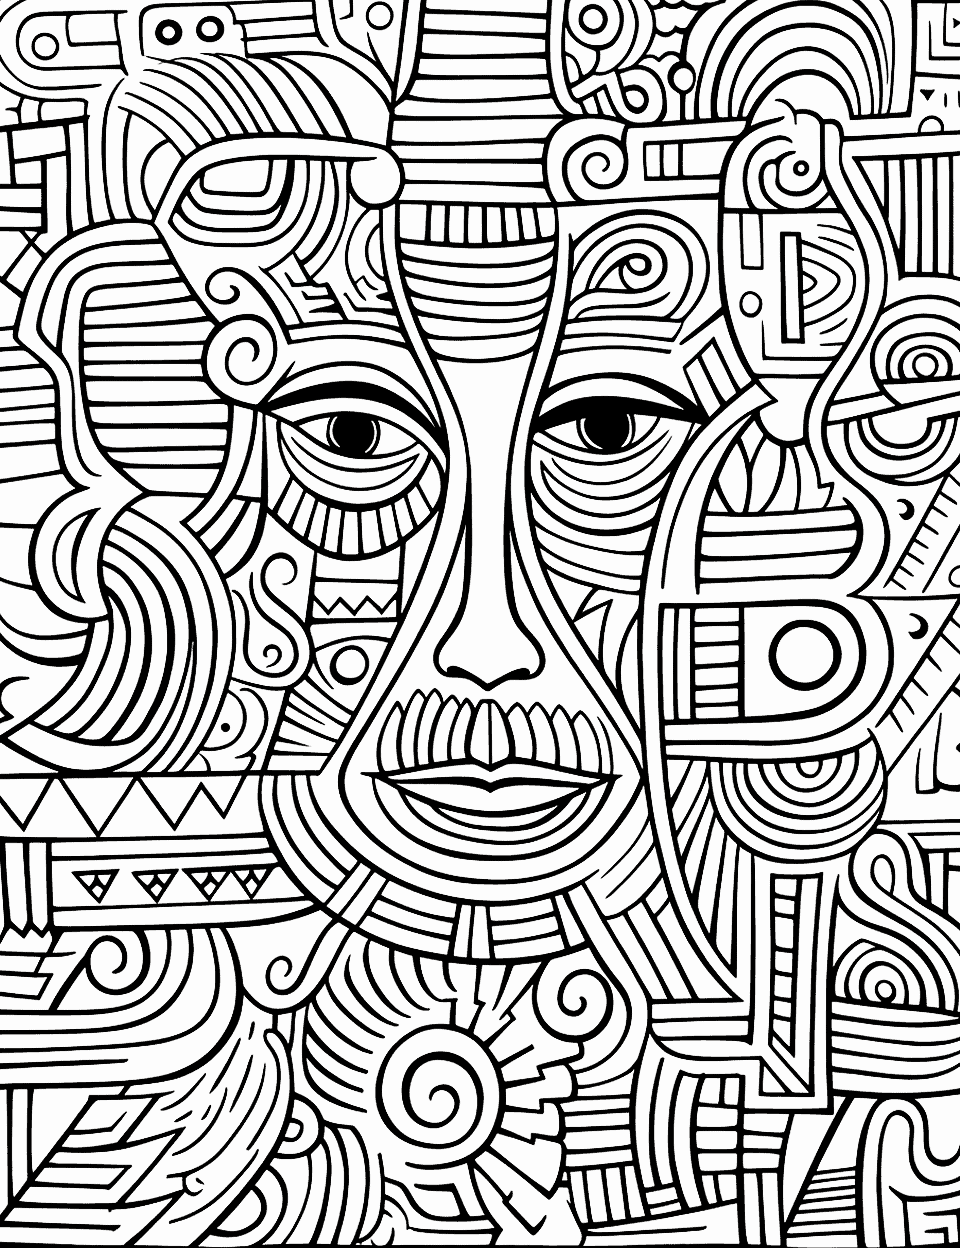 Abstract Wonder Adult Coloring Page - Irregular shapes and patterns forming a cohesive design.